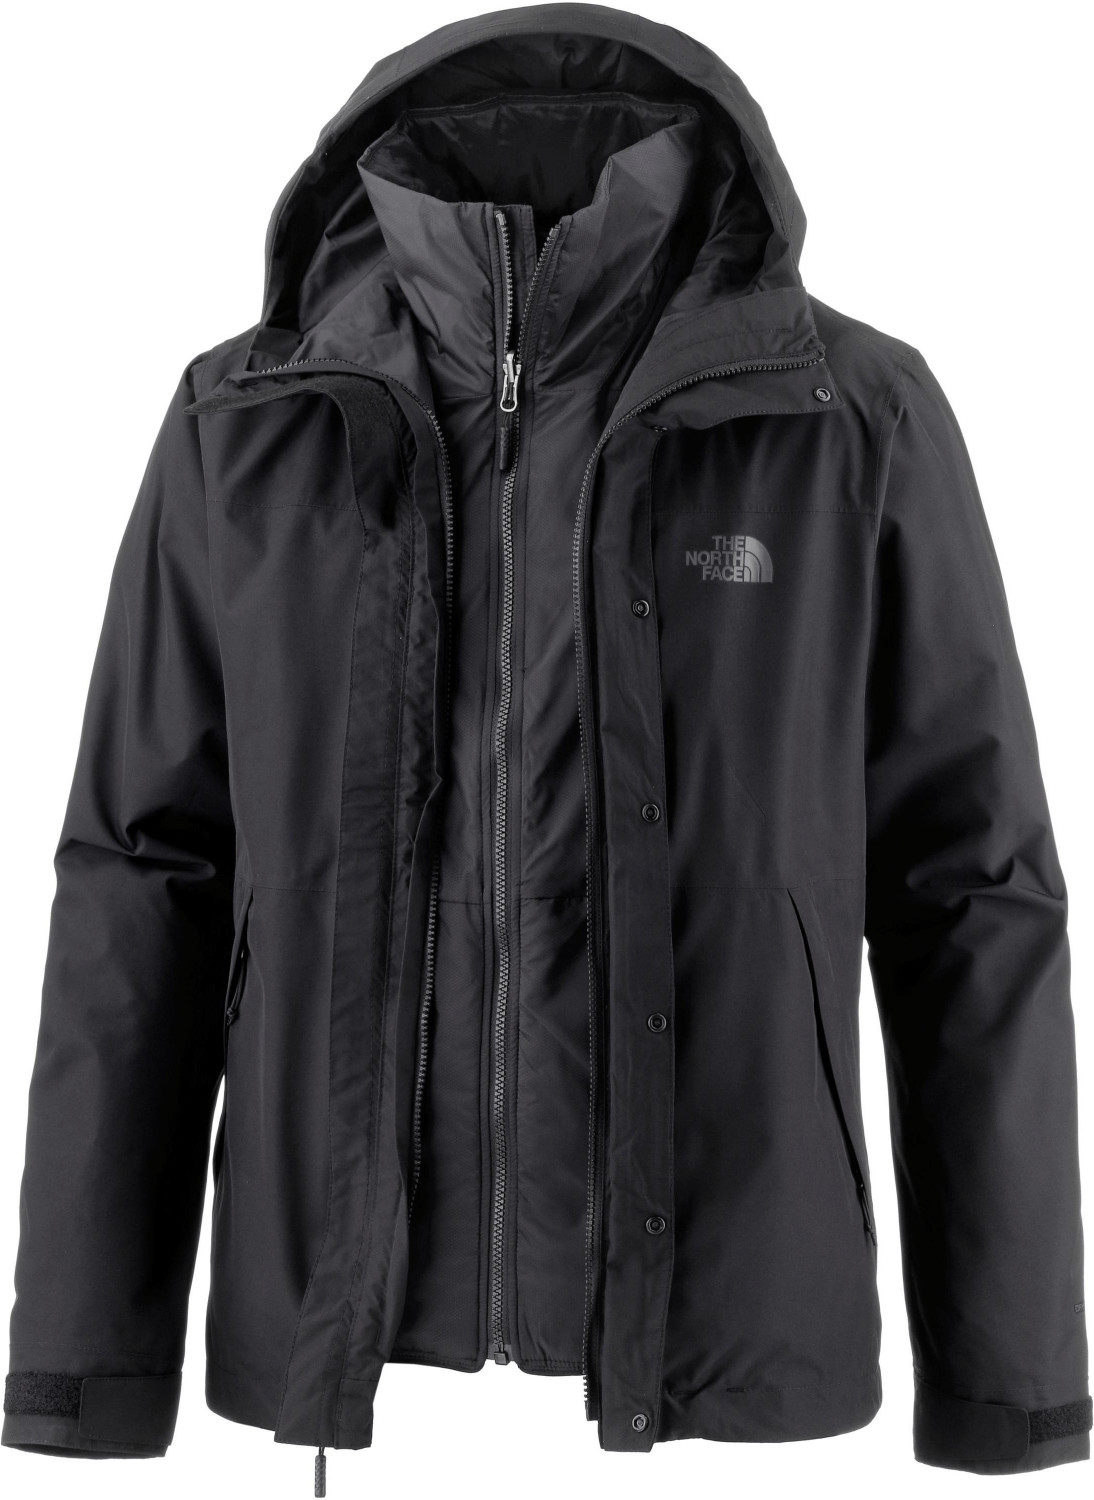 The North Face Naslund Triclimate Jacket Men tnf black ab 190,56